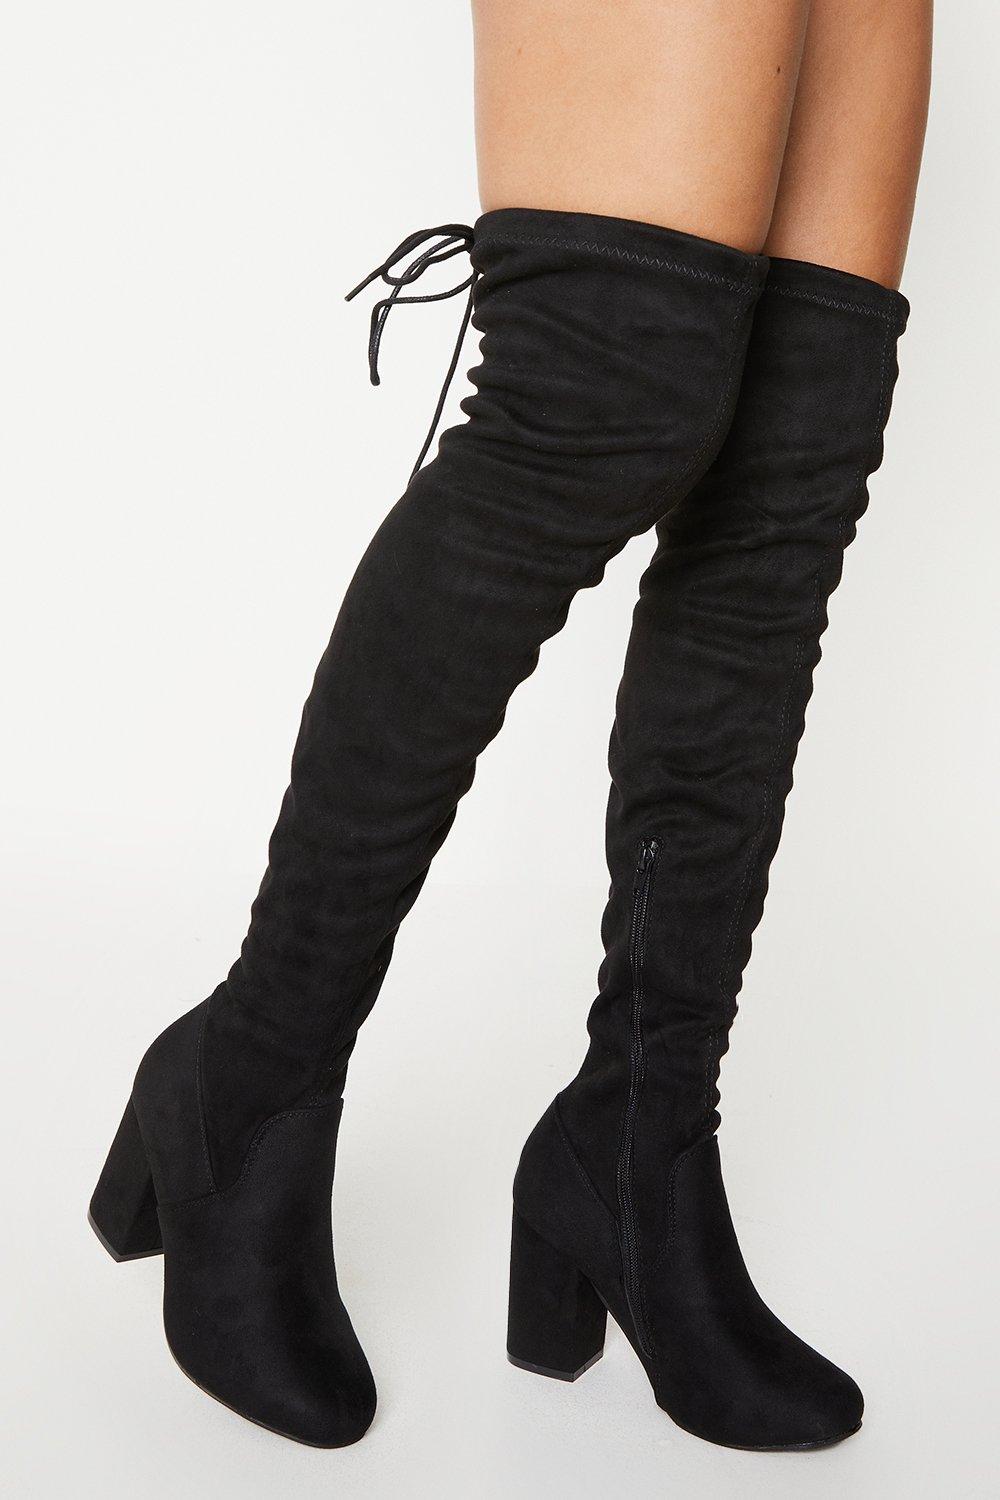 Women’s Wide Fit Krissy Over The Knee Boots - natural black - 7